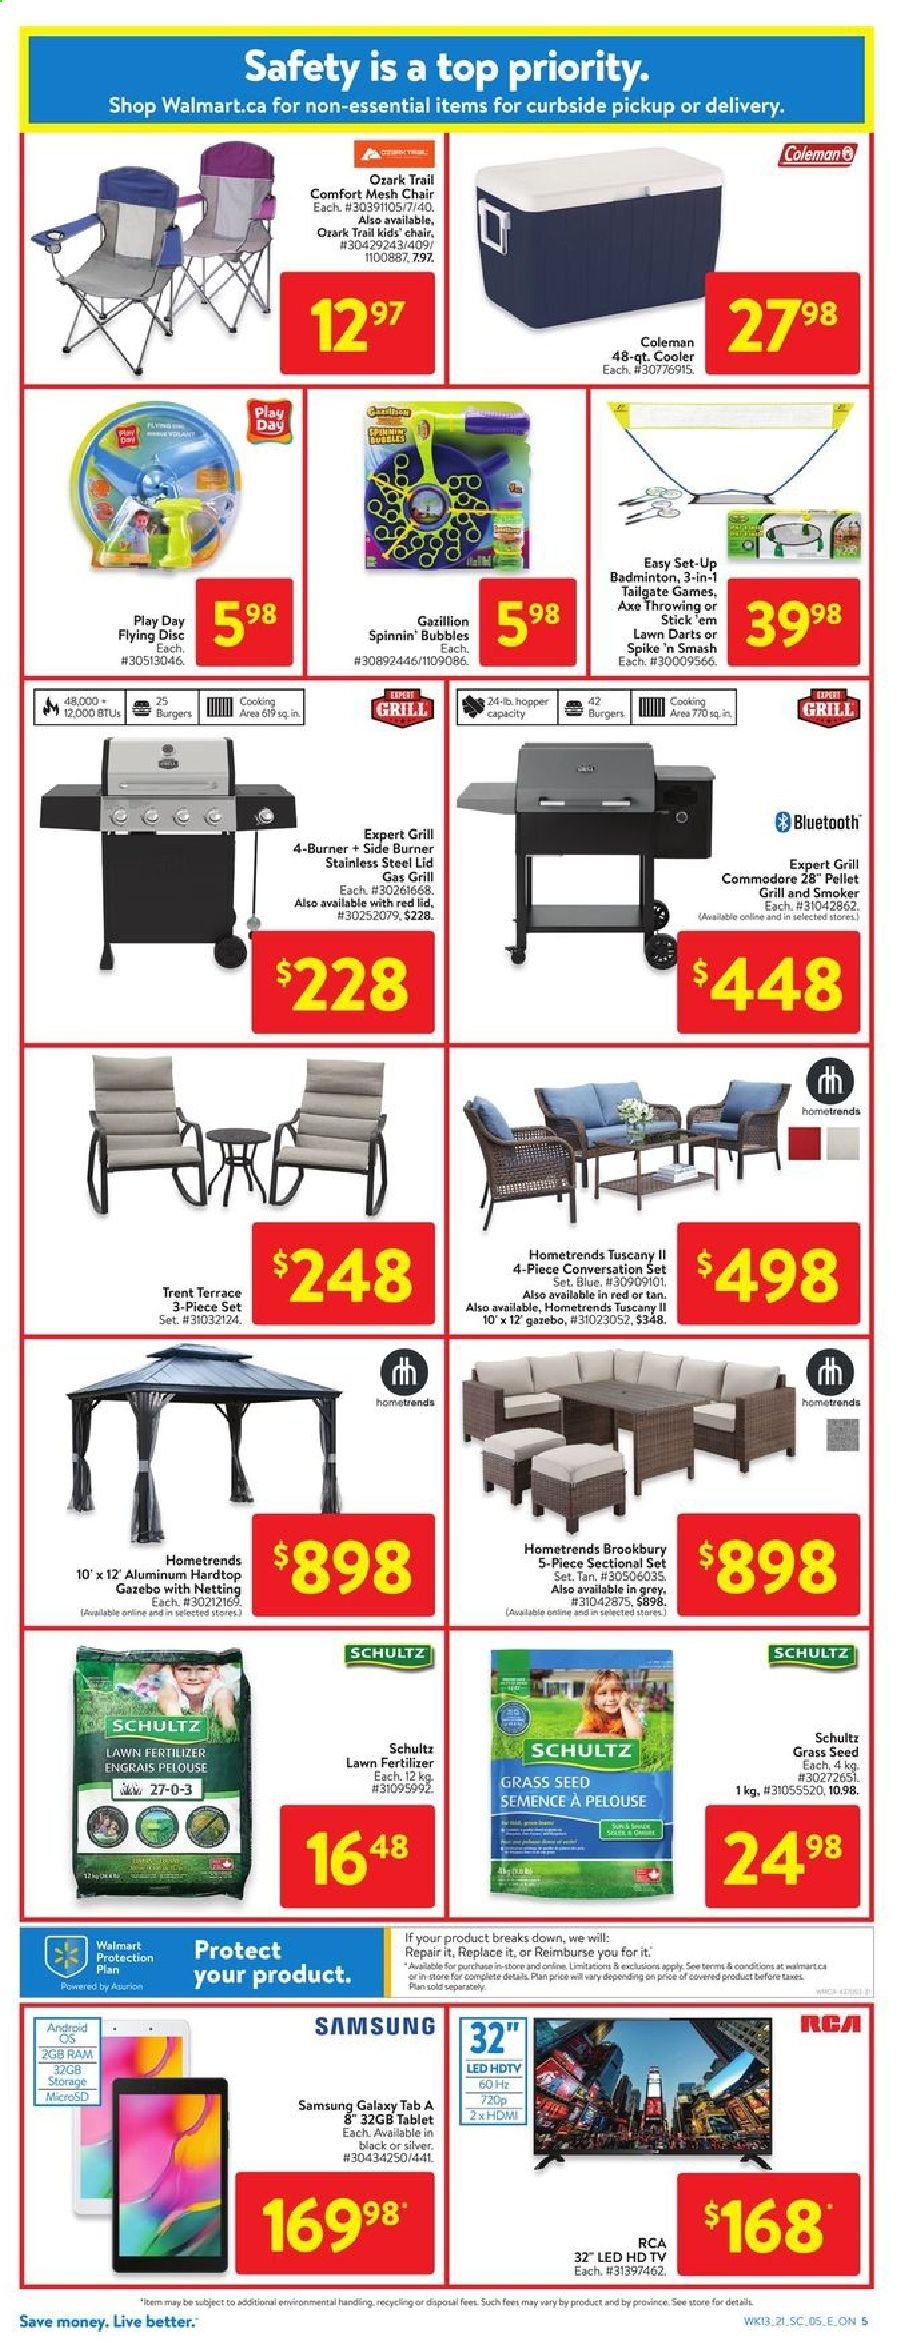 thumbnail - Walmart Flyer - April 22, 2021 - April 28, 2021 - Sales products - Samsung Galaxy, Samsung Galaxy Tab, hamburger, lid, plant seeds, RCA, HDTV, TV, chair, 5-piece sectional, Coleman, pellet gun, gazebo, gas grill, grill, grill and smoker, smoker, pellet grill, fertilizer, grass seed, Samsung, tablet. Page 9.